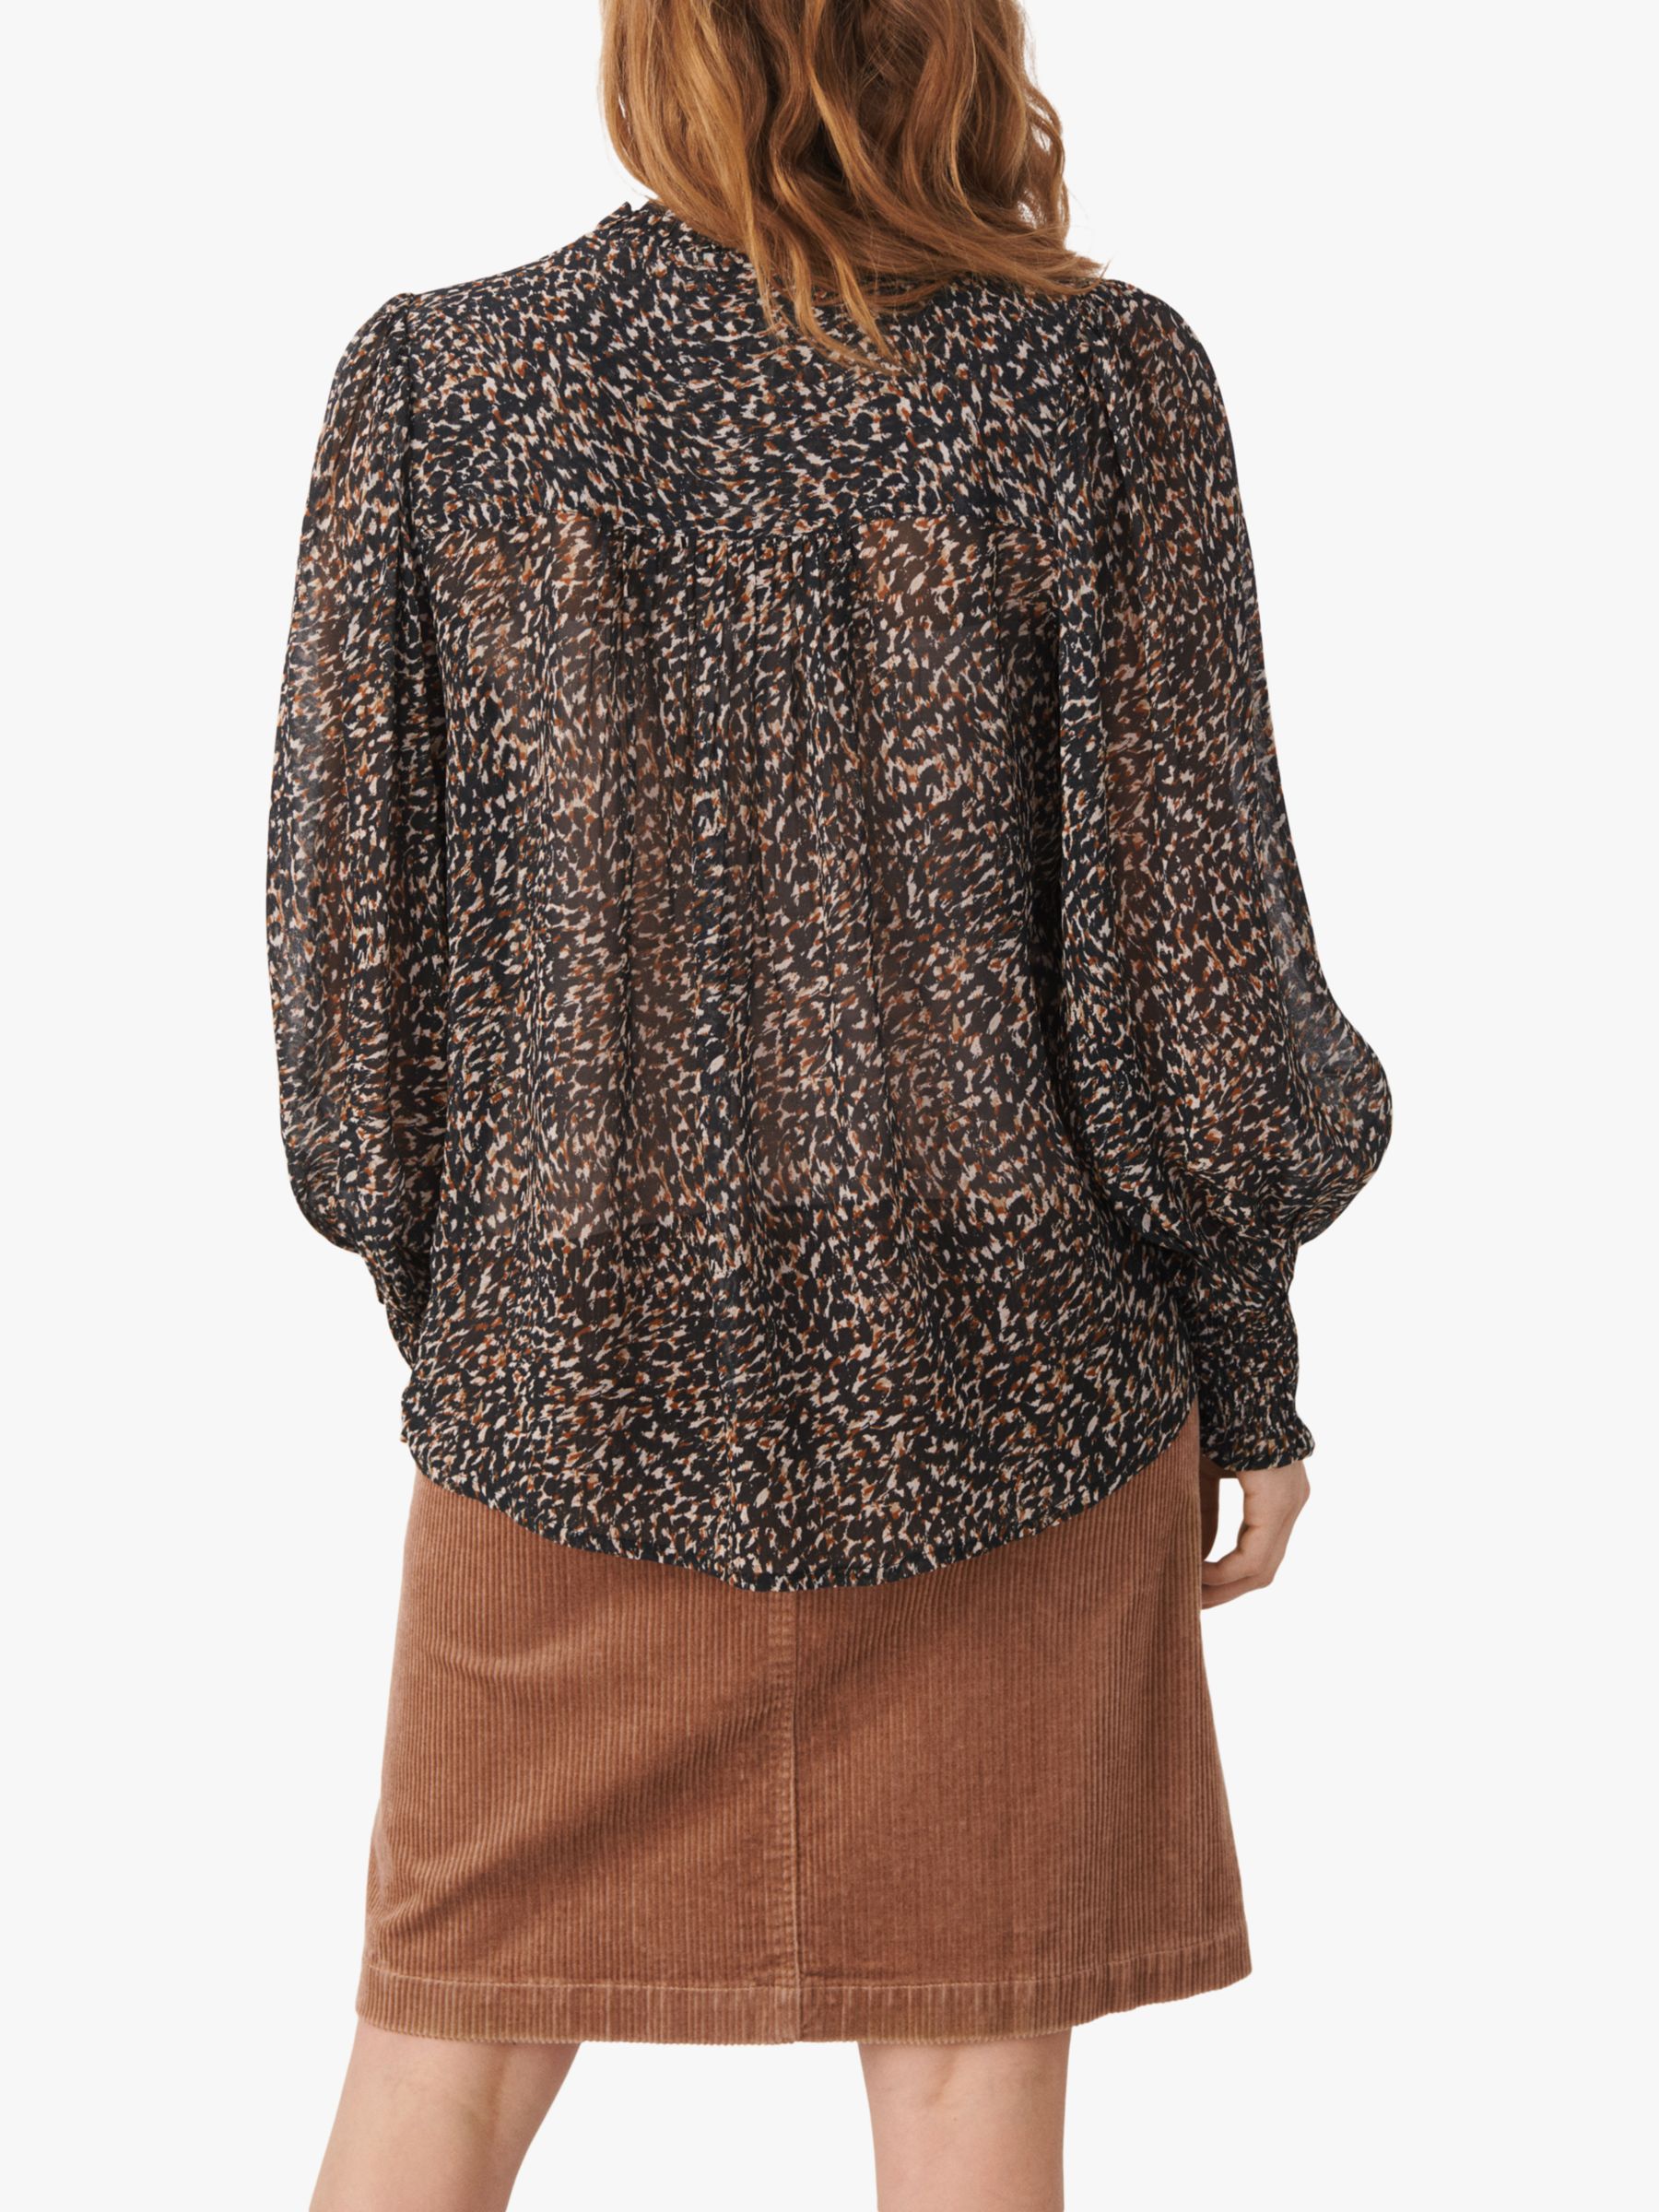 Buy Part Two Randy Long Sleeve Blouse Online at johnlewis.com